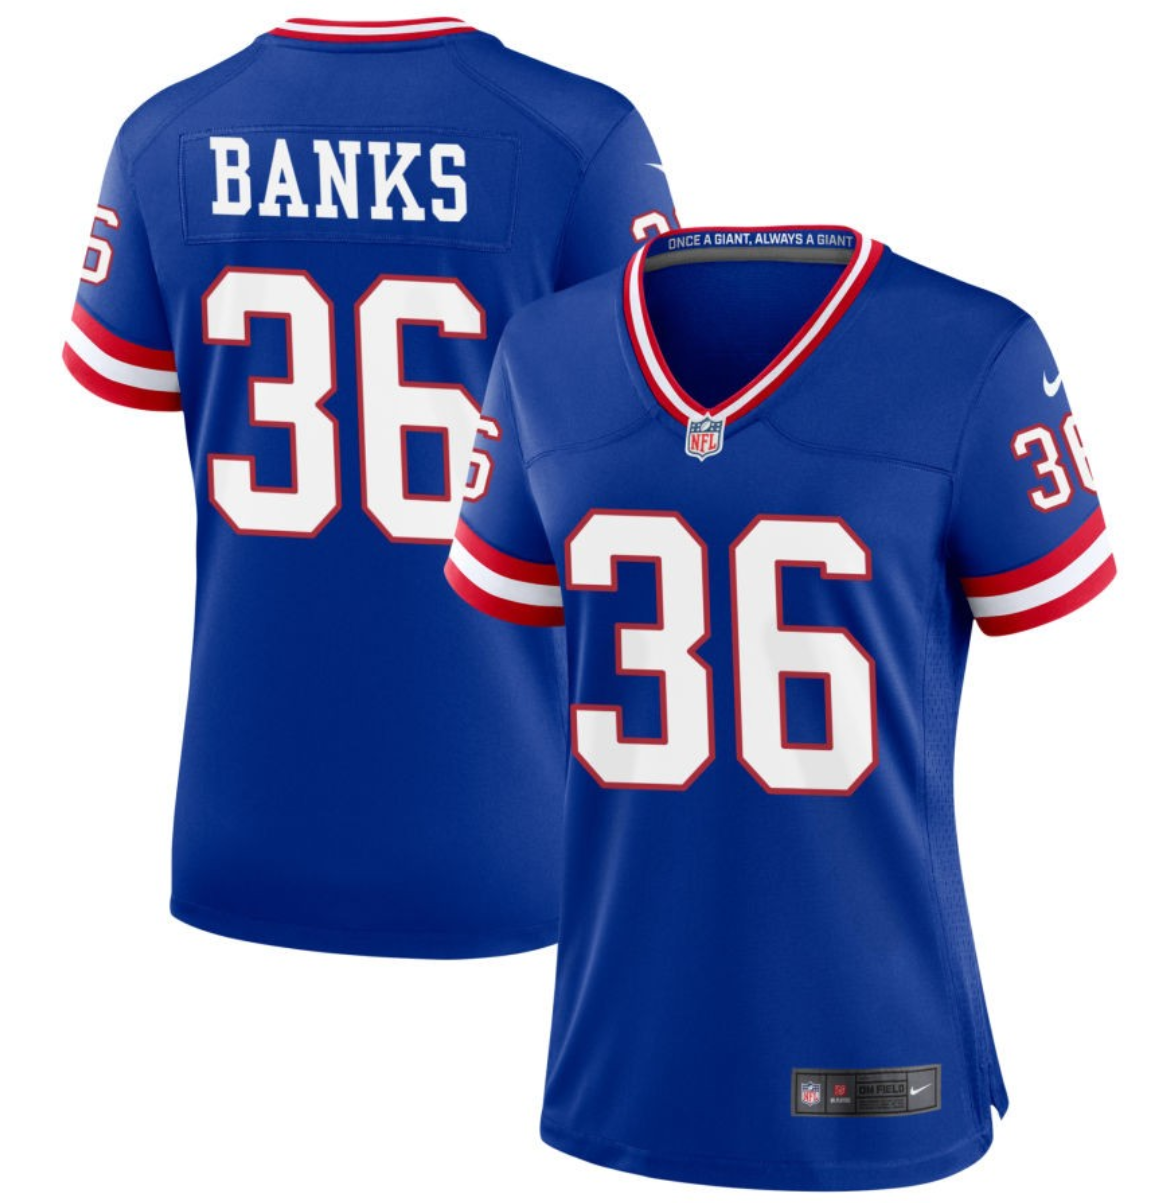 Women's New York Giants #36 Deonte Banks Royal Classic Retired Player Stitched Game Jersey(Run Small)